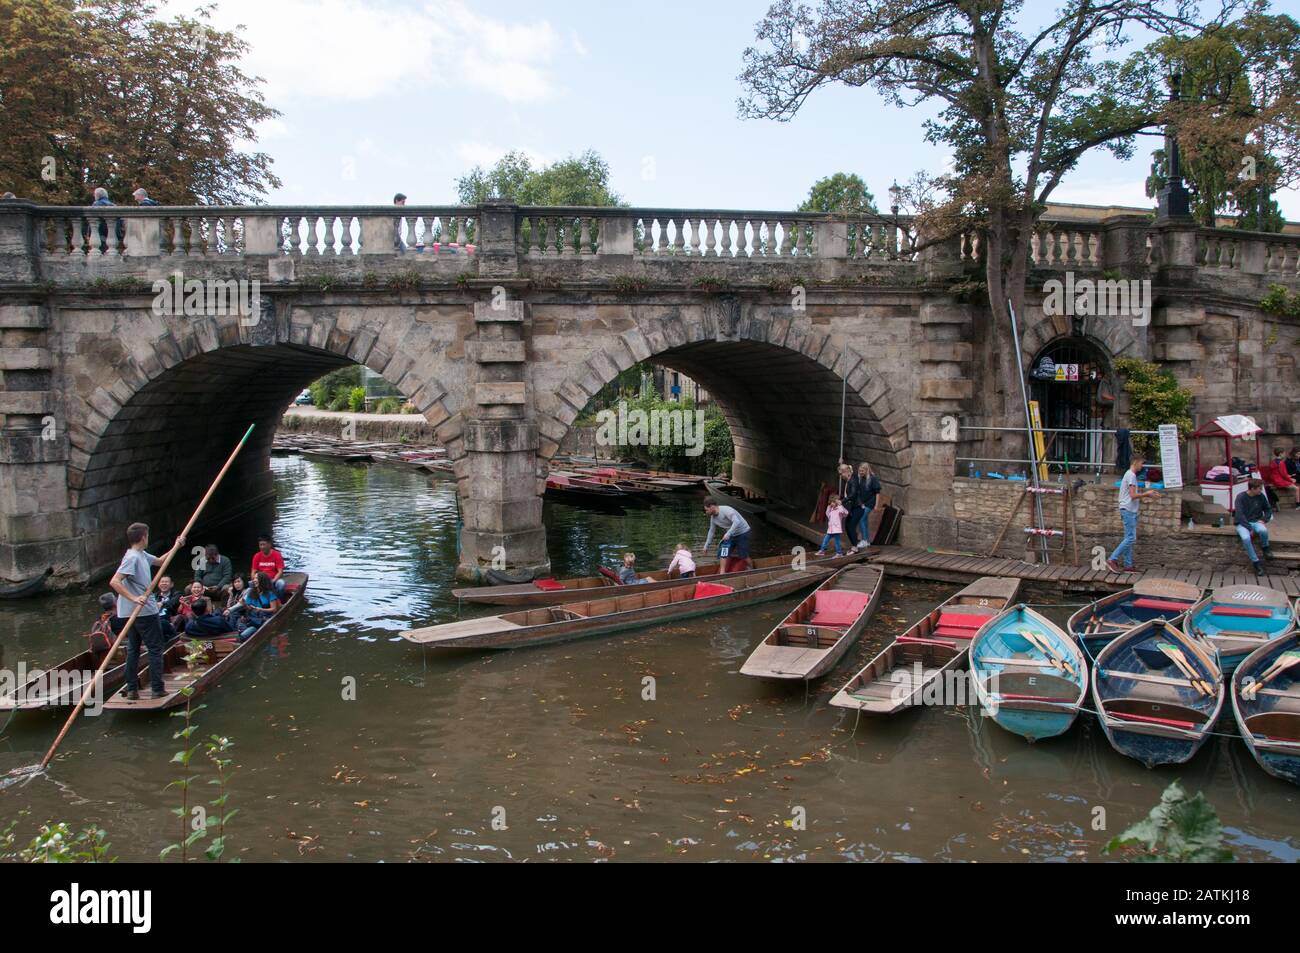 Punting on the river Cherwell, Oxford, United Kingdom Stock Photo